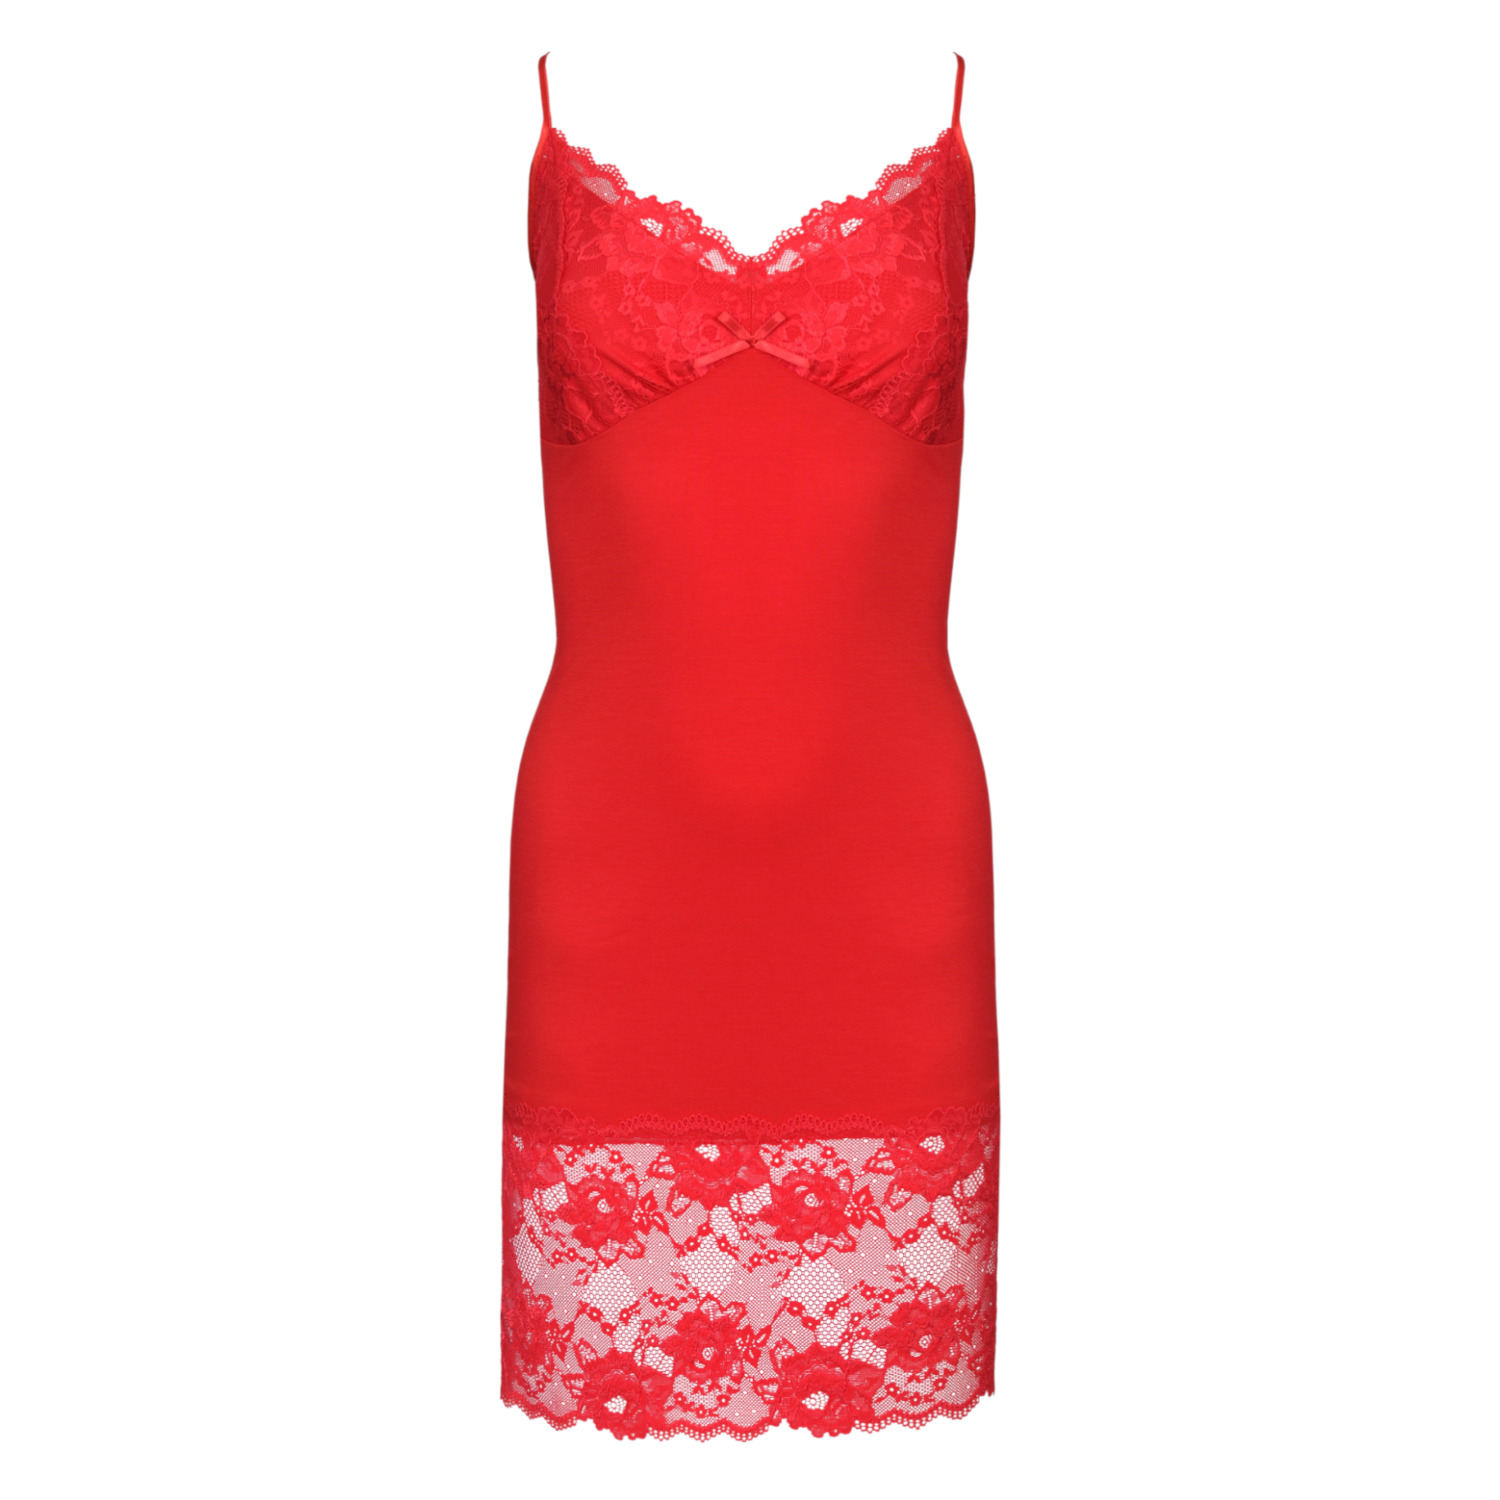 Women’s Classic Lace Chemise Nightdress - Red Extra Large Oh!Zuza Night & Day